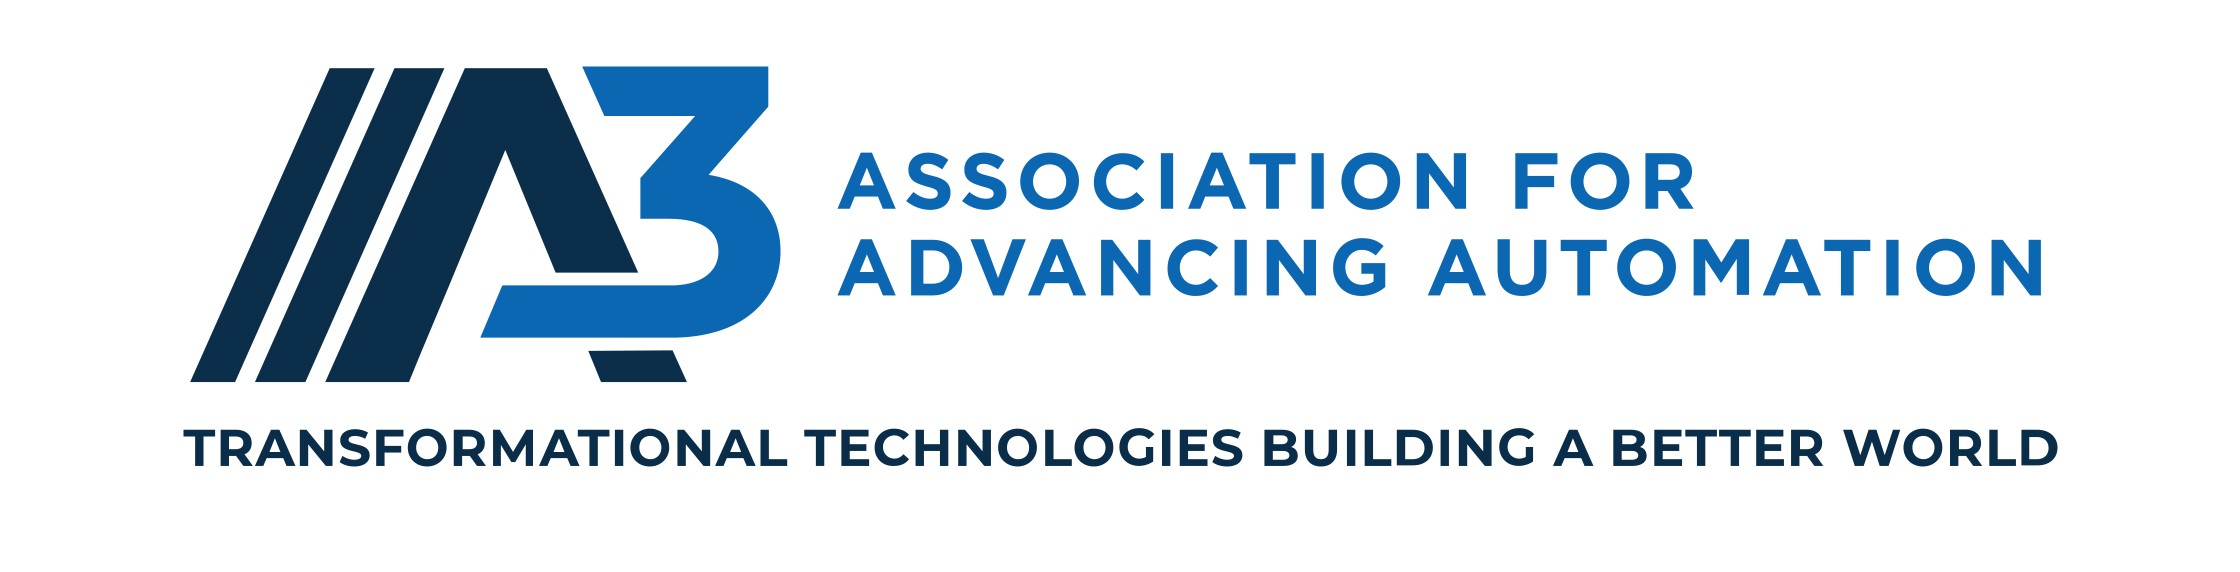 Logo of A3, the Association for Advancing Automation